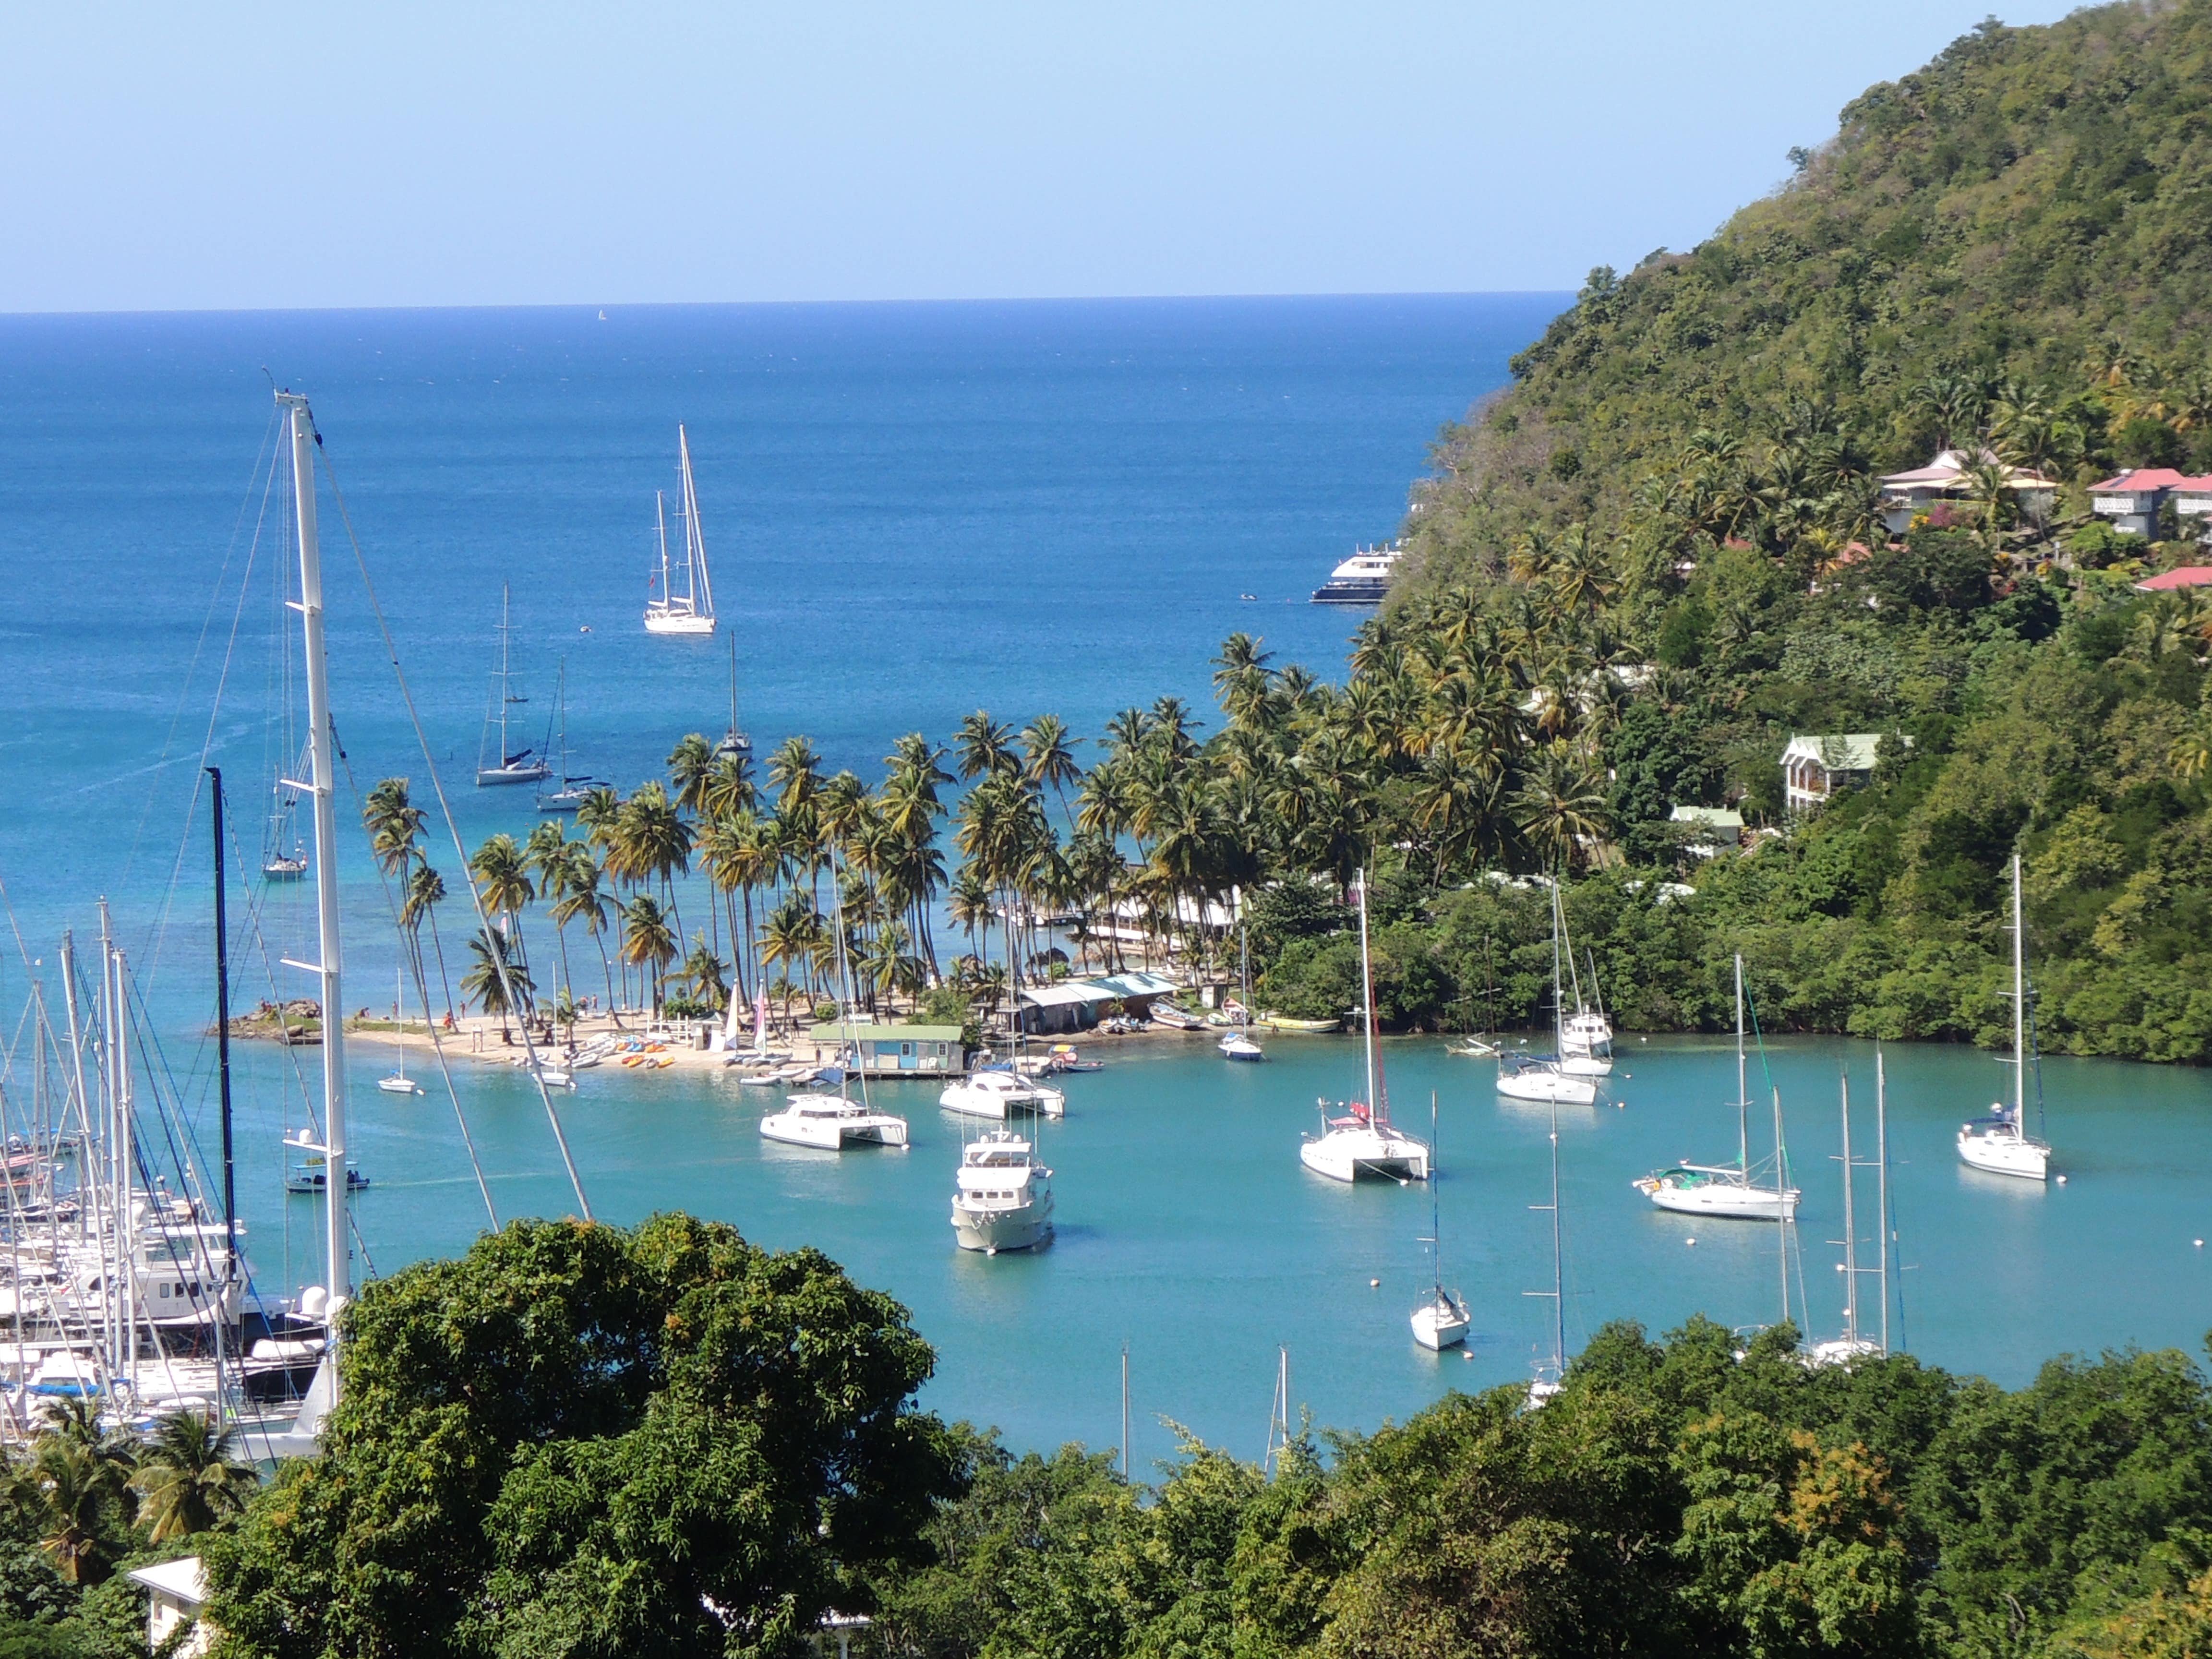 Discover beautiful coves in luxury holiday destinations